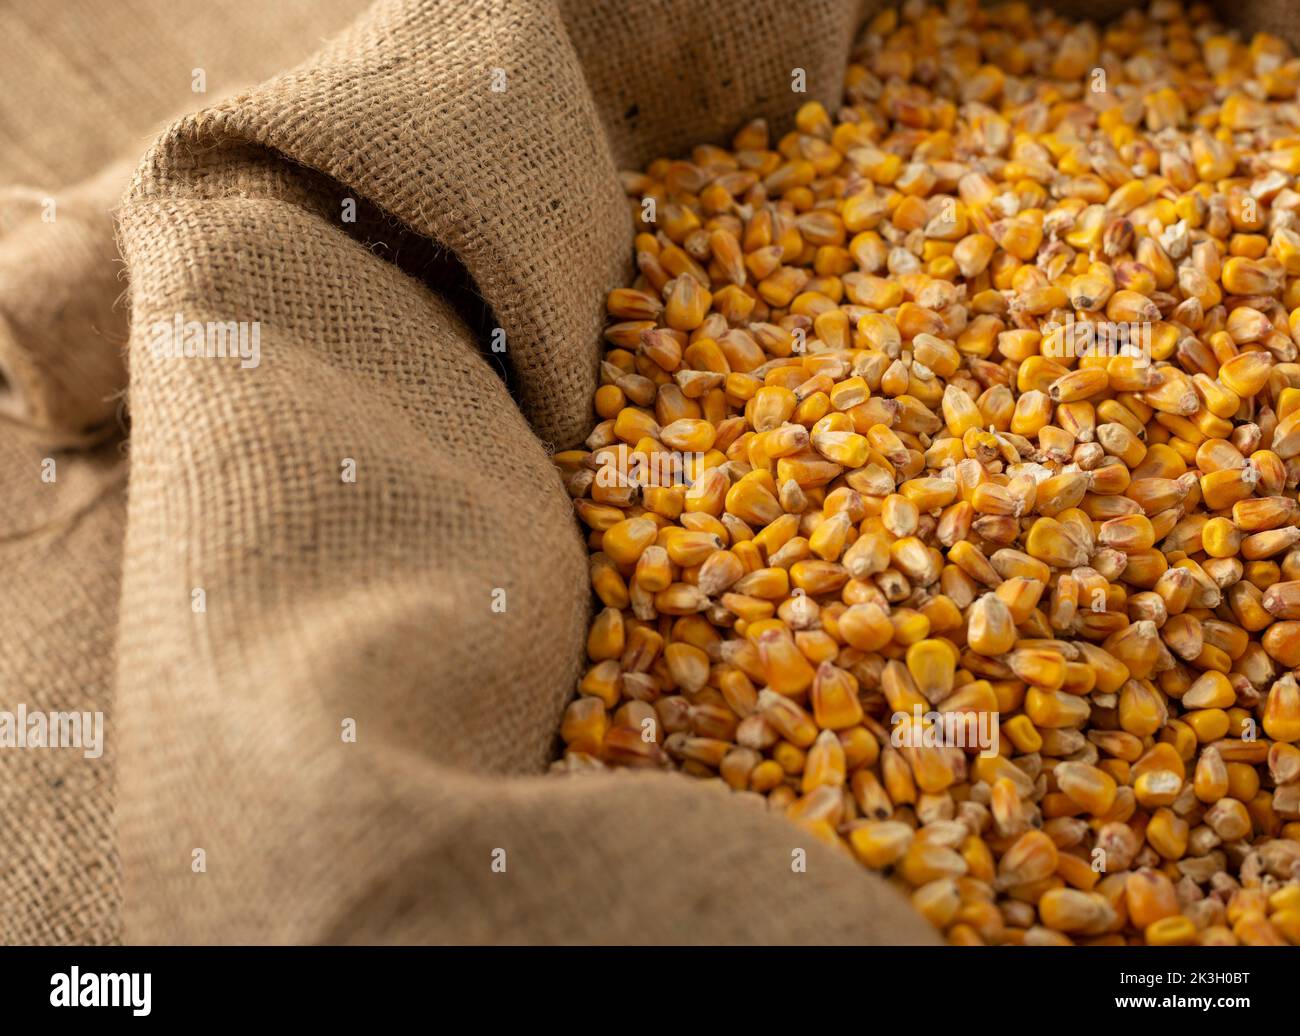 Burlap sack filled with yellow corn kernels Stock Photo